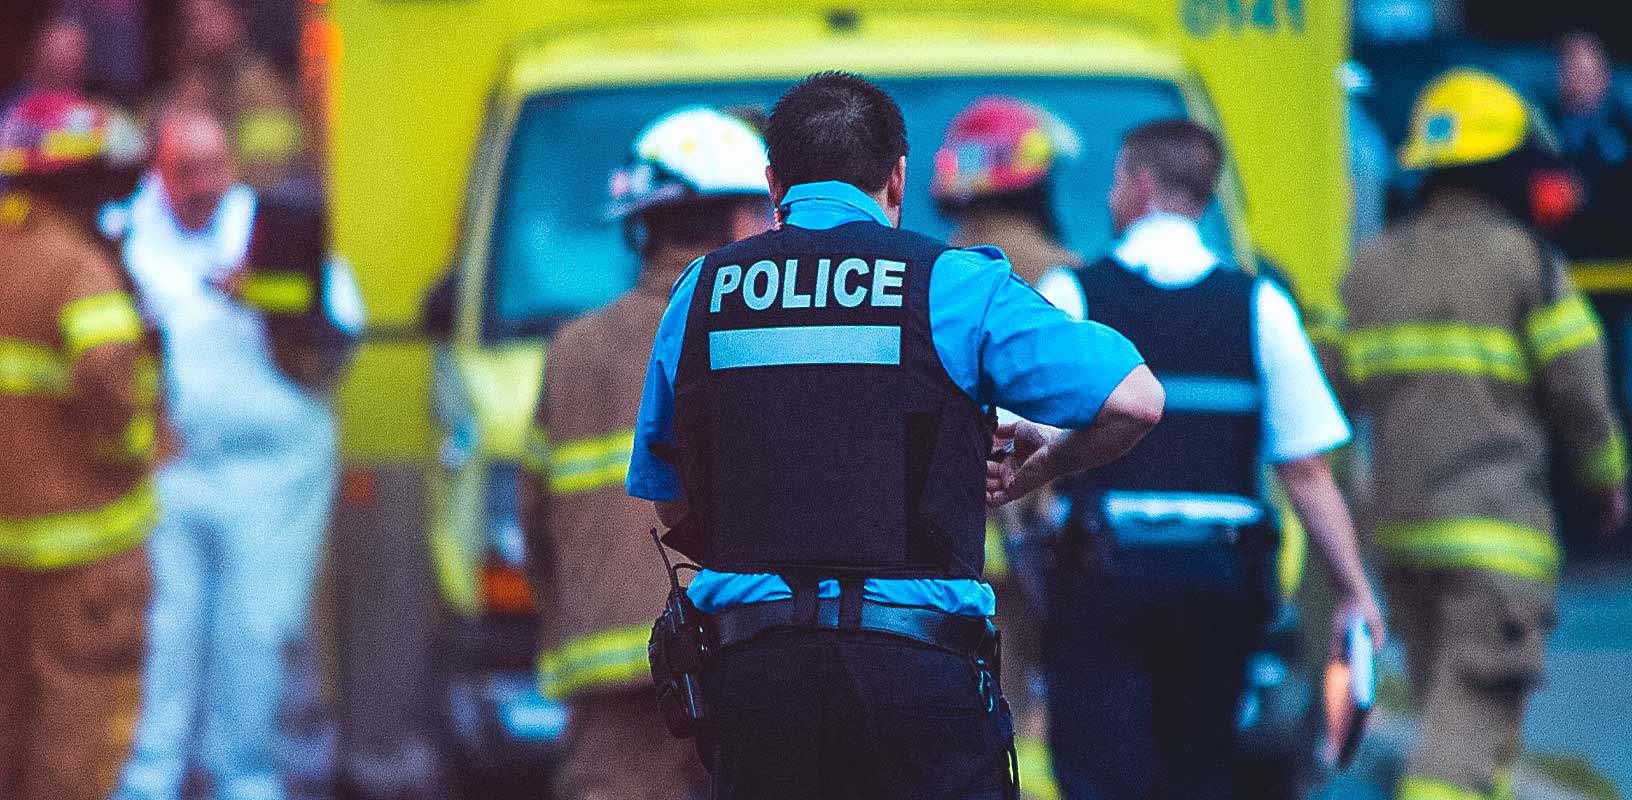 image of police with emergency service vehicle